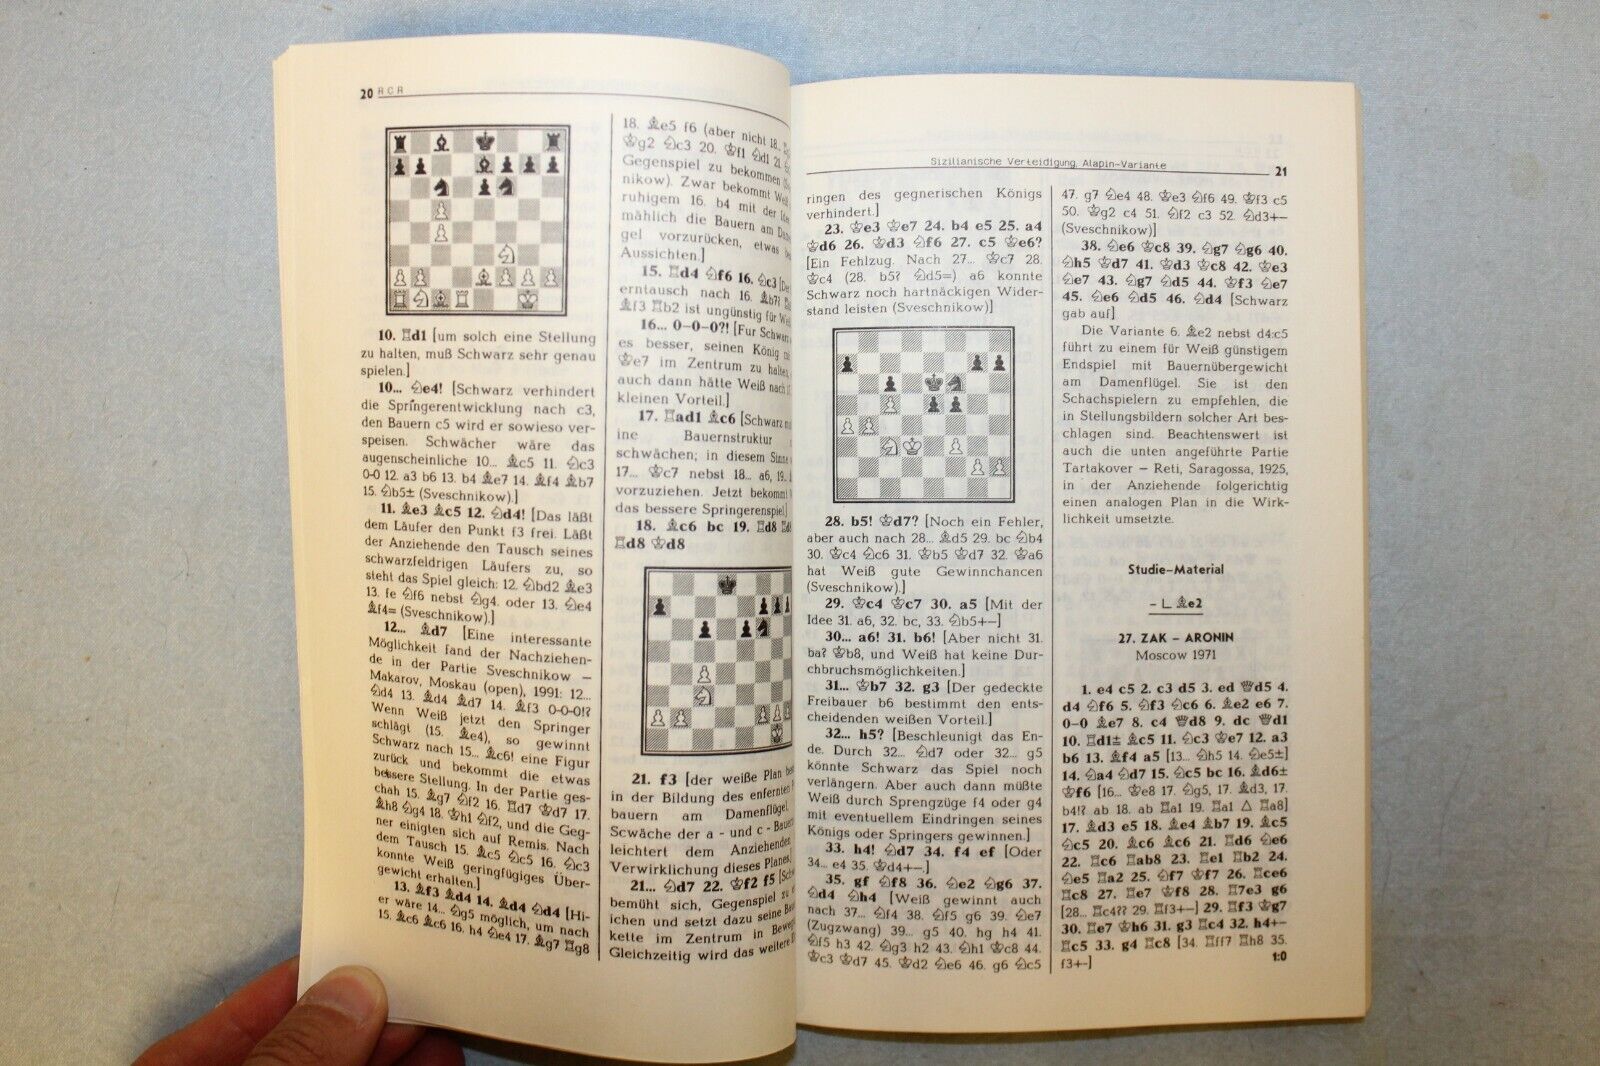 10724.4 Books: Russian Chess Report Series. Lectures and Games. Interschrift & German